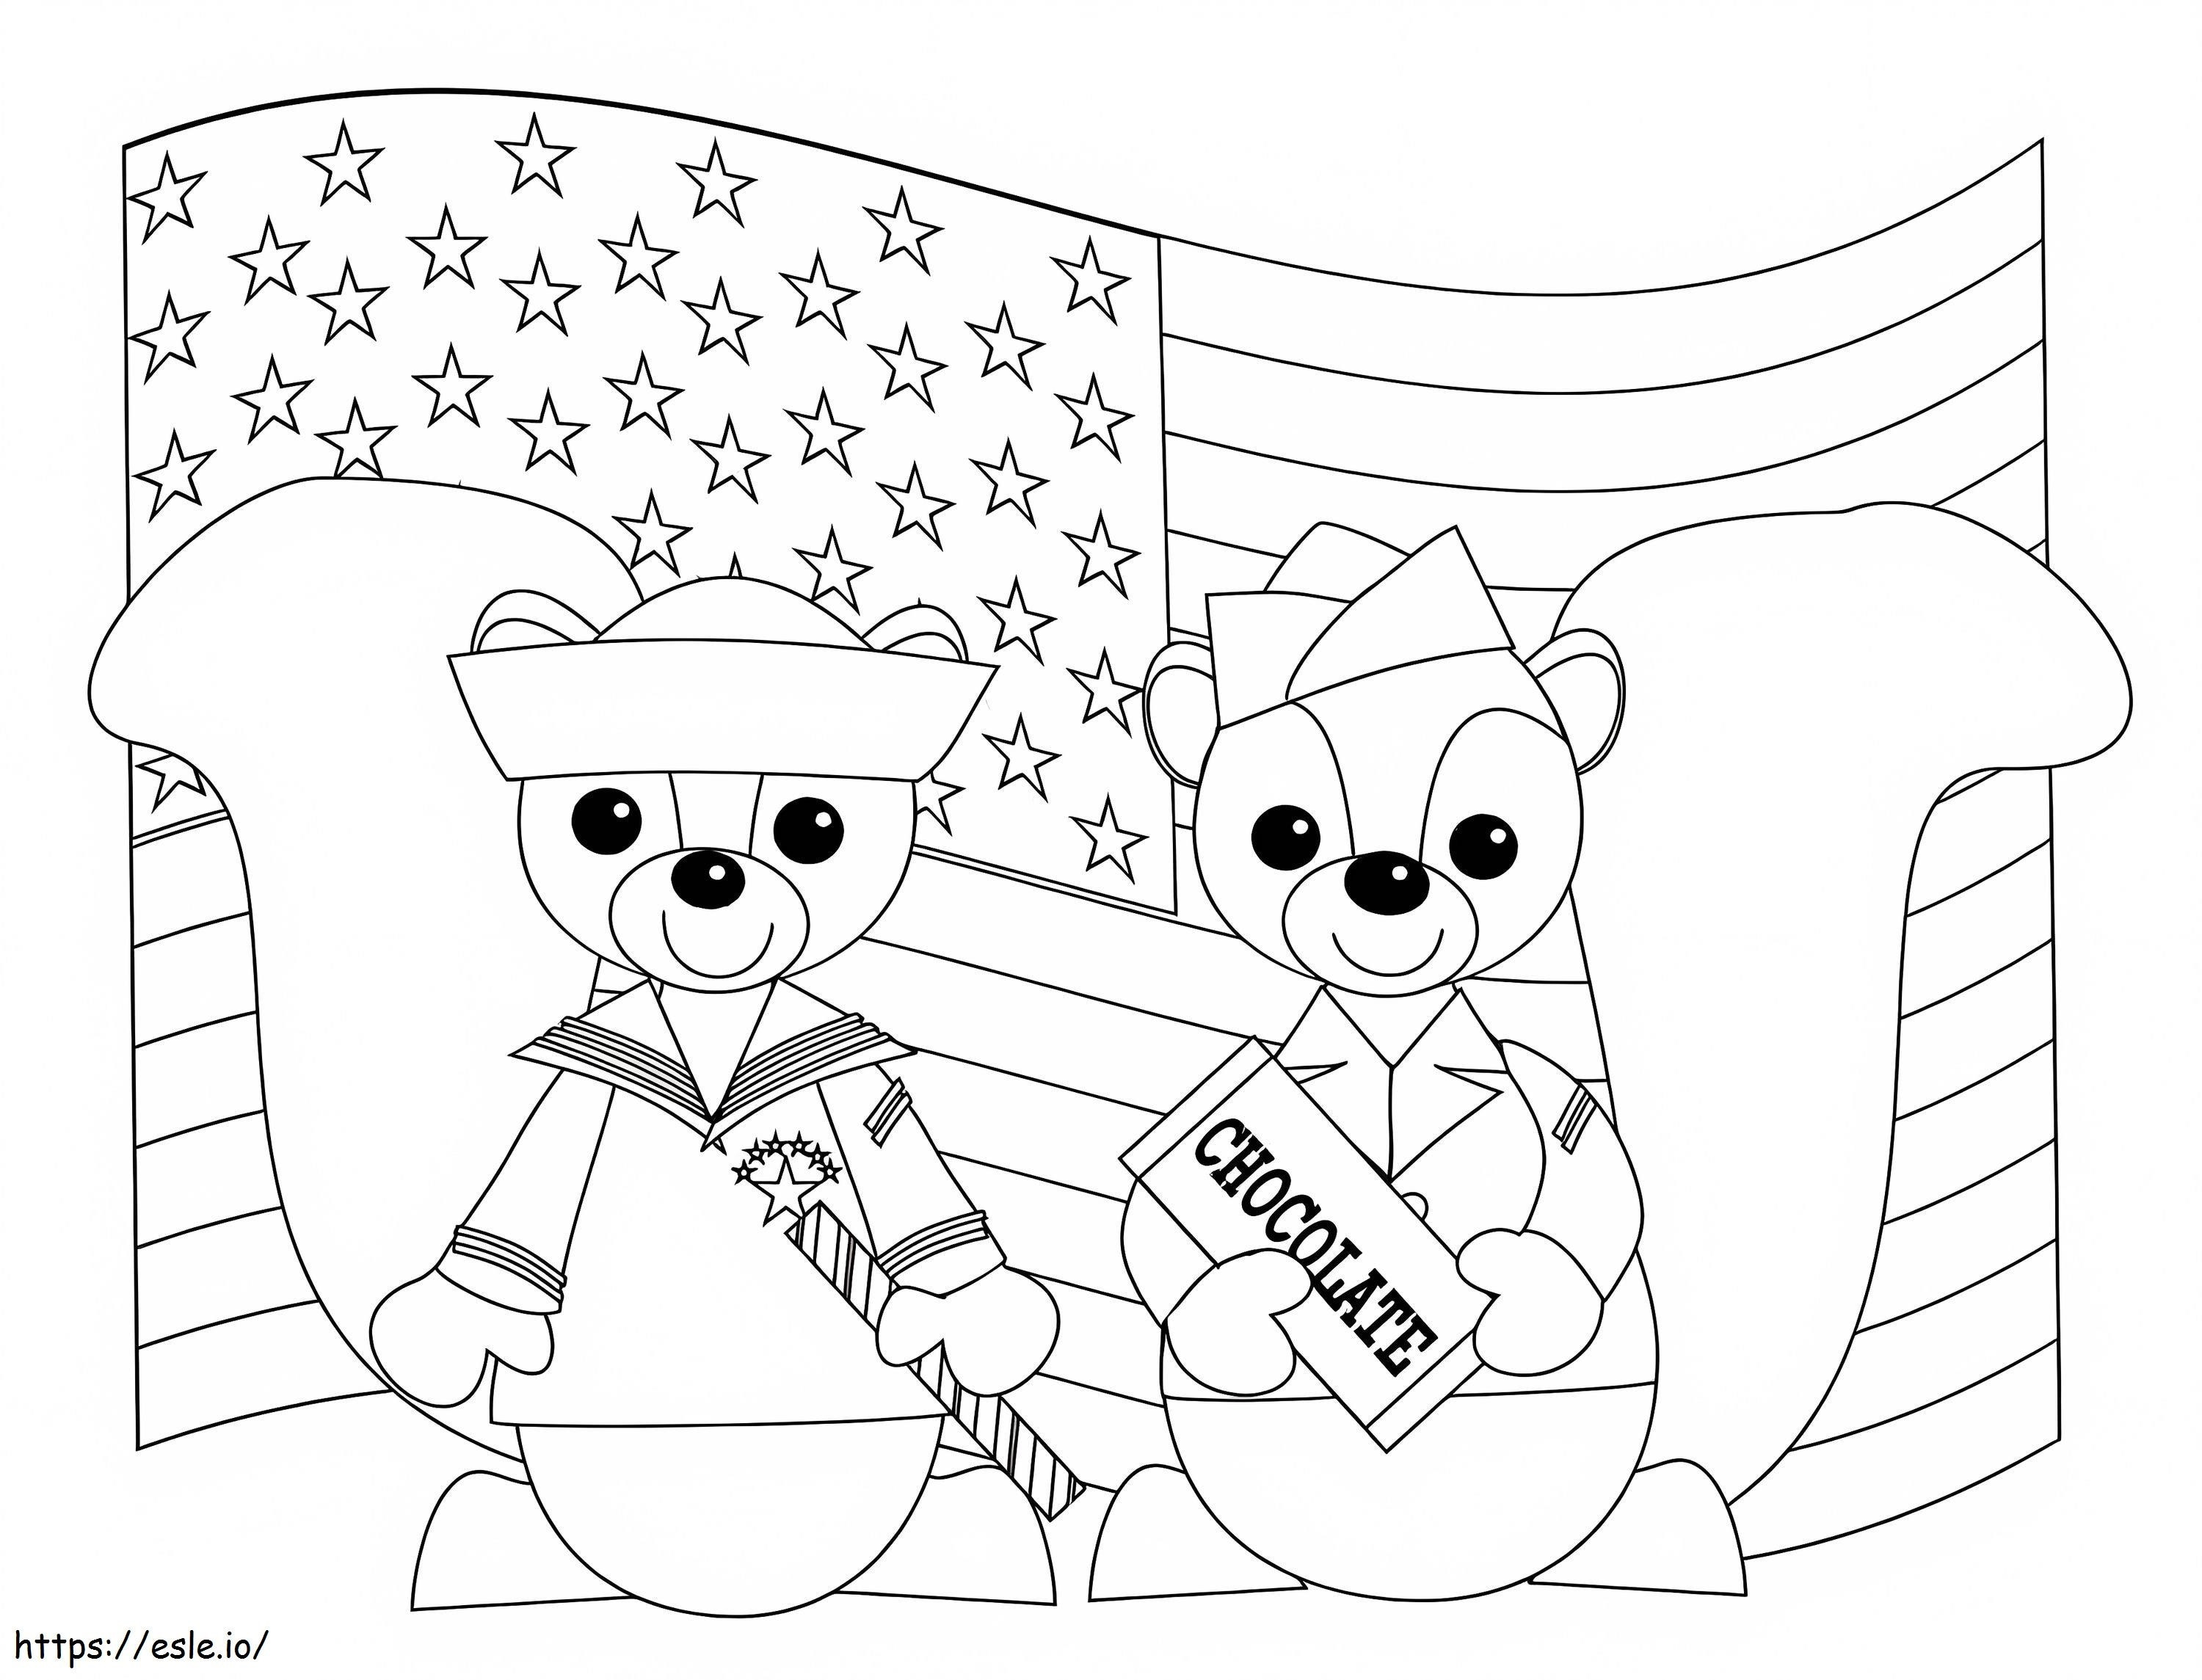 Two Squirrels On Veterans Day coloring page